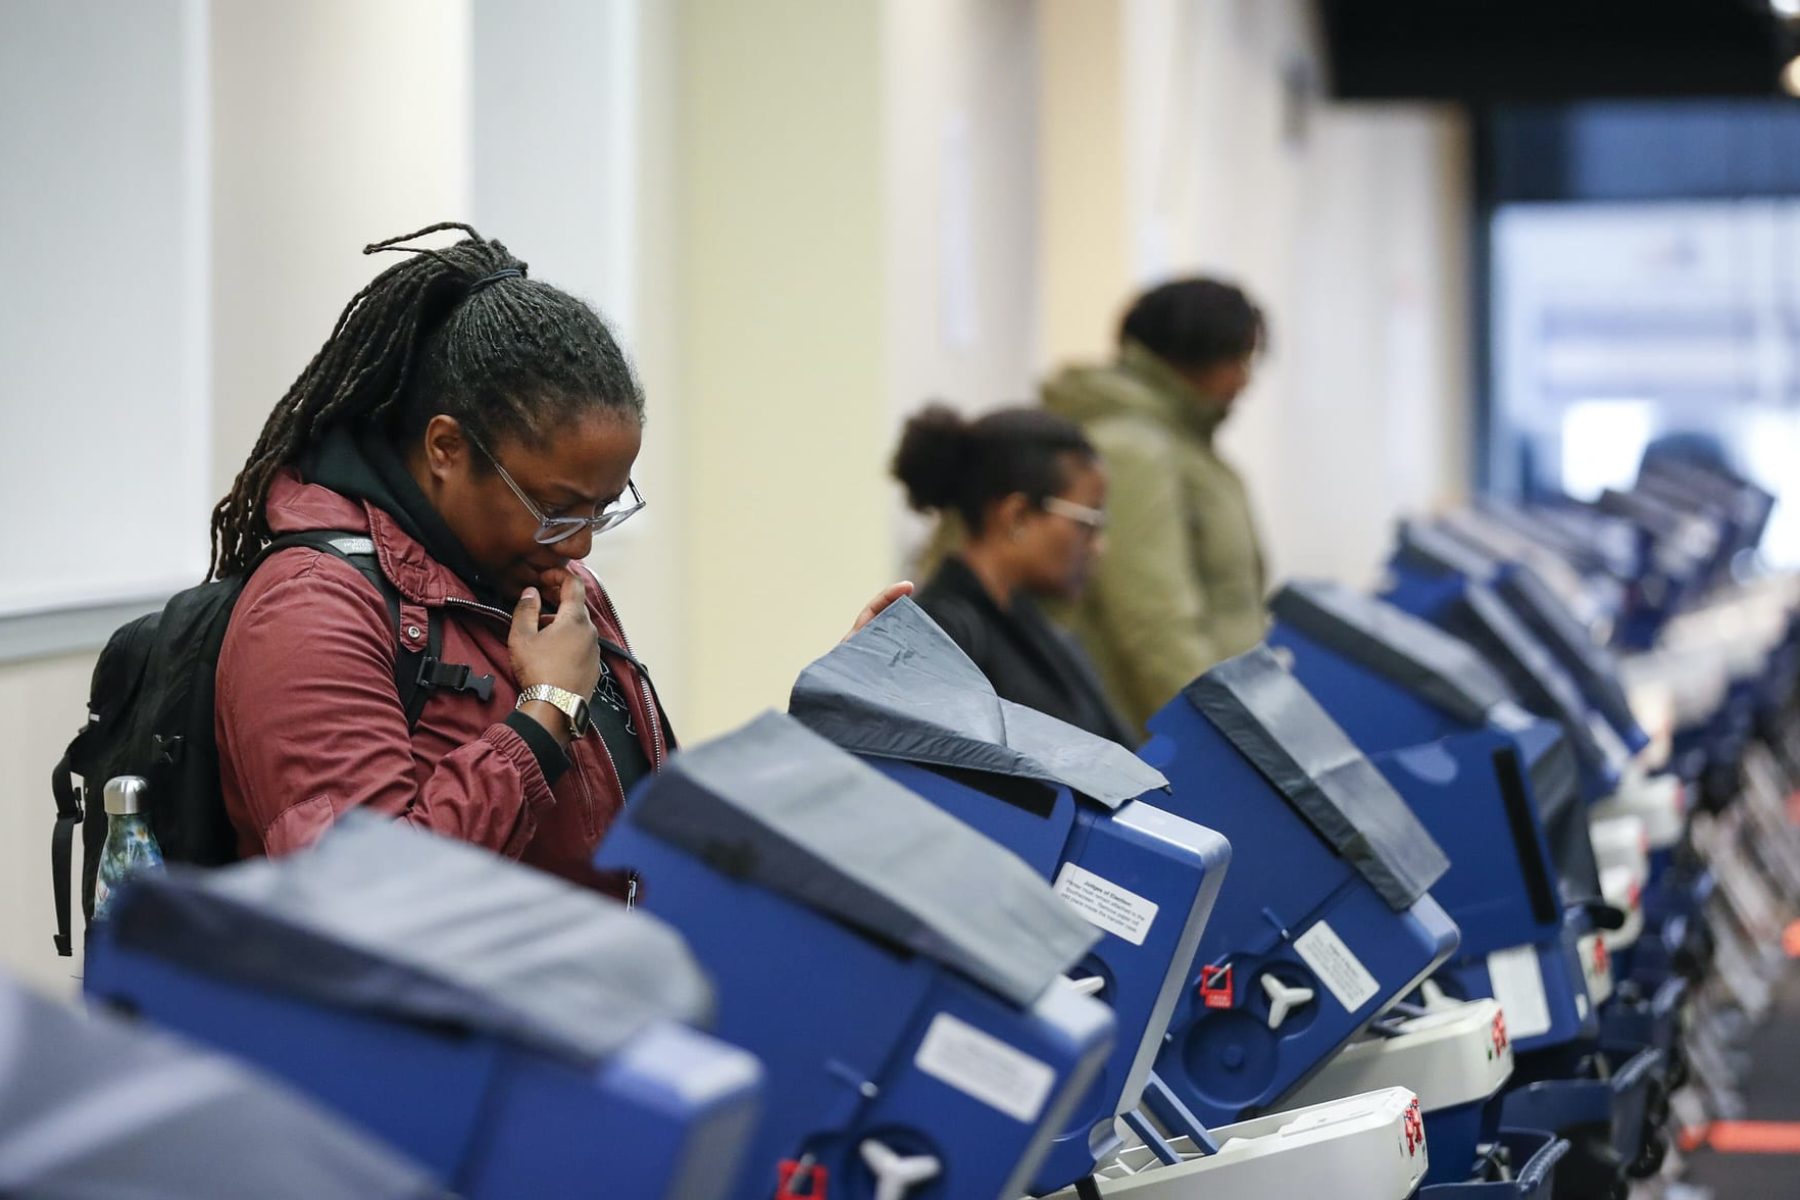 Voters cast their ballots at the polling place in downtown Chicago, Illinois on April 2, 2019. - Chicago residents went to the polls in a runoff election Tuesday to elect the US city's first black female mayor in a historic vote centered on issues of economic equality, race and gun violence. Lightfoot and Toni Preckwinkle, both African-American women, are competing for the top elected post in the city. (Photo by Kamil Krzaczynski / AFP) (Photo credit should read KAMIL KRZACZYNSKI/AFP via Getty Images)